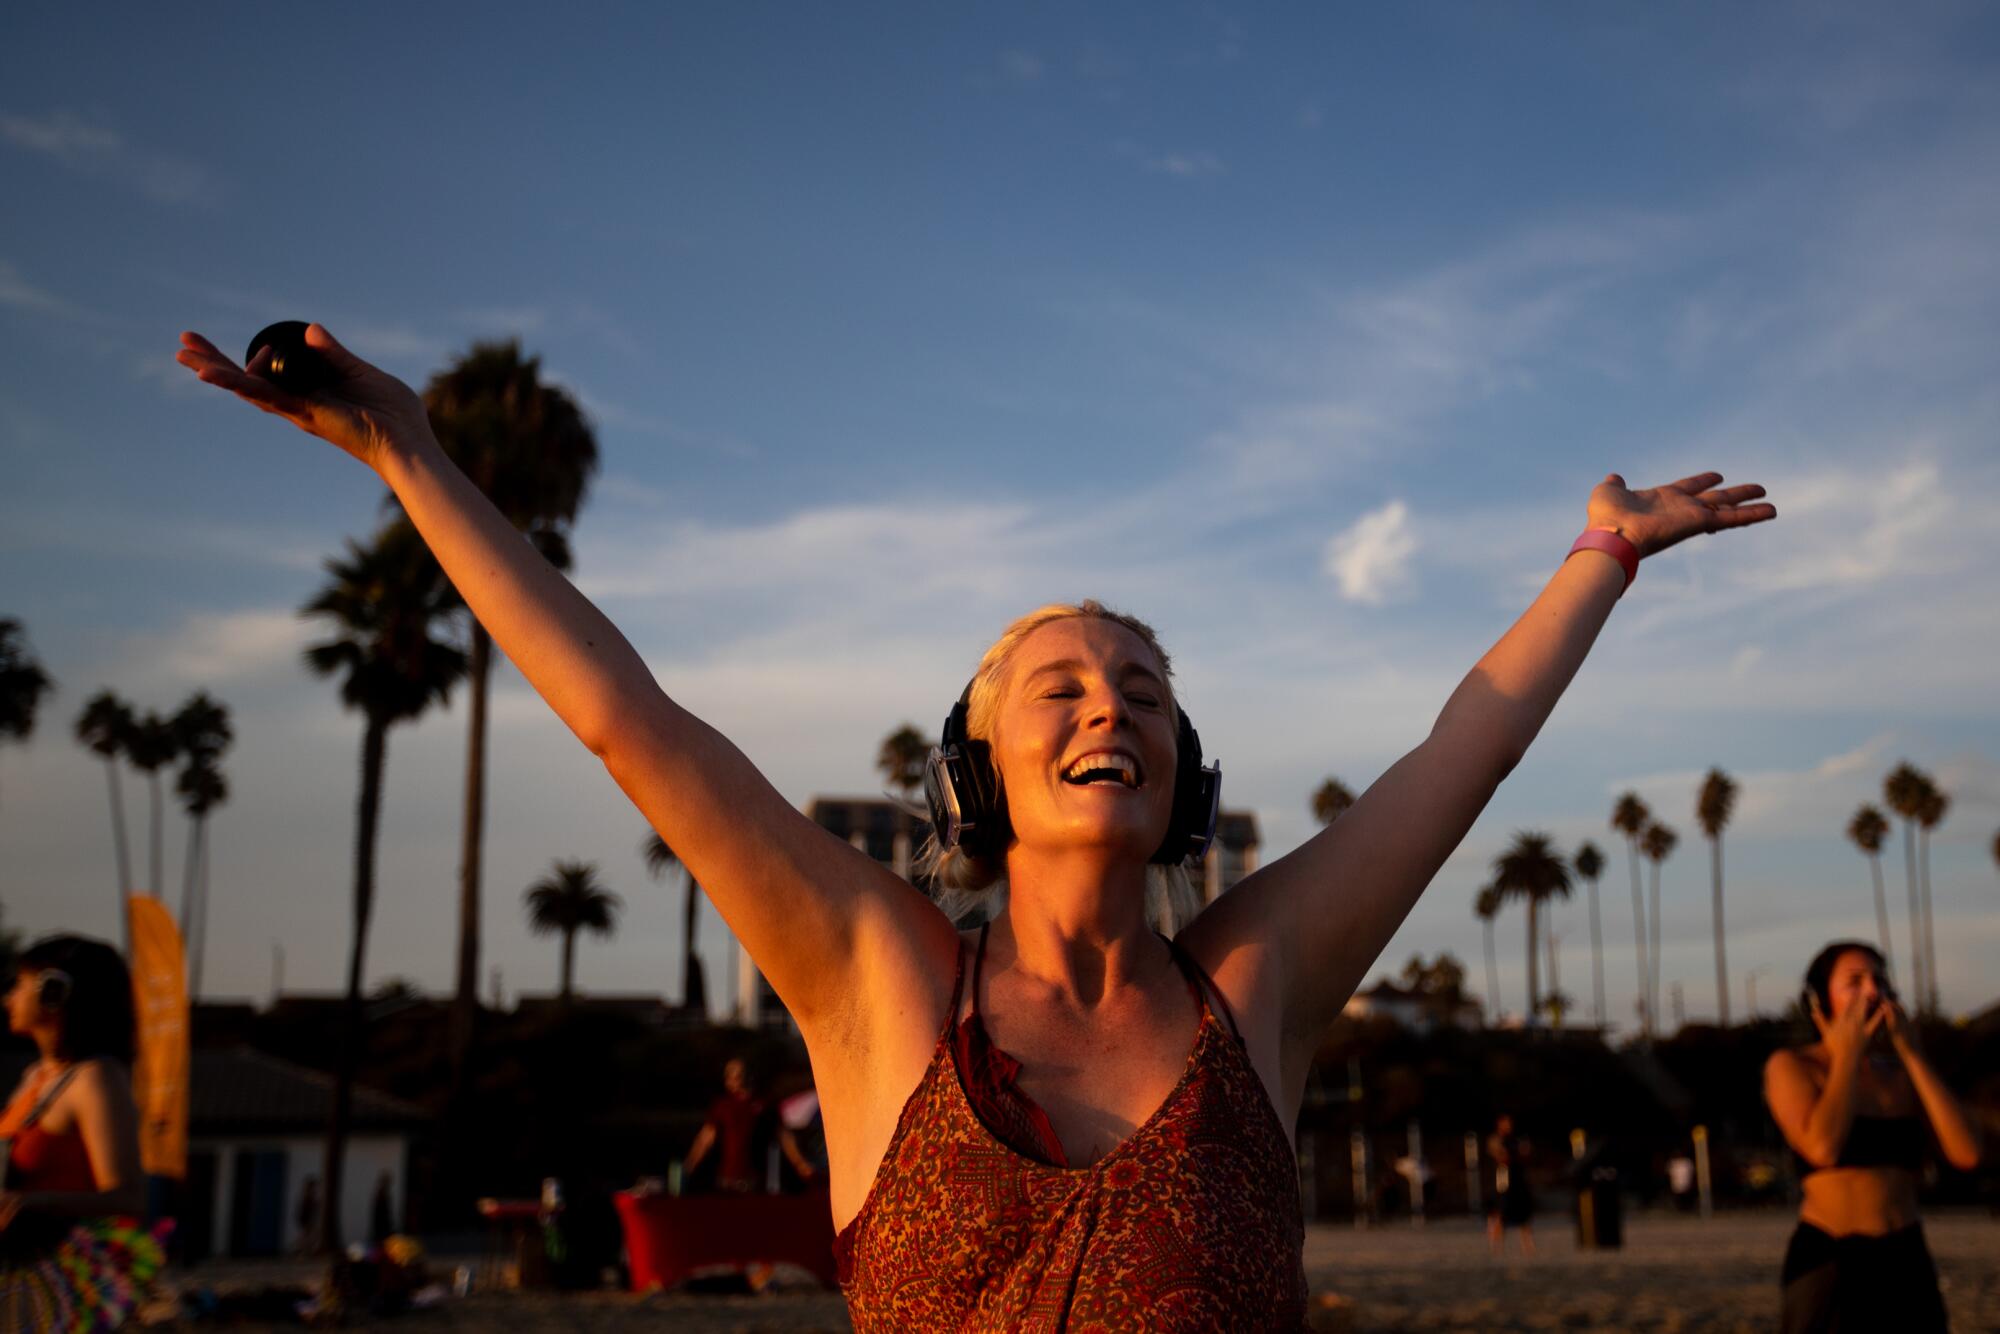 A woman wearing headphones with her arms raised into the air, on the beach at sunset.